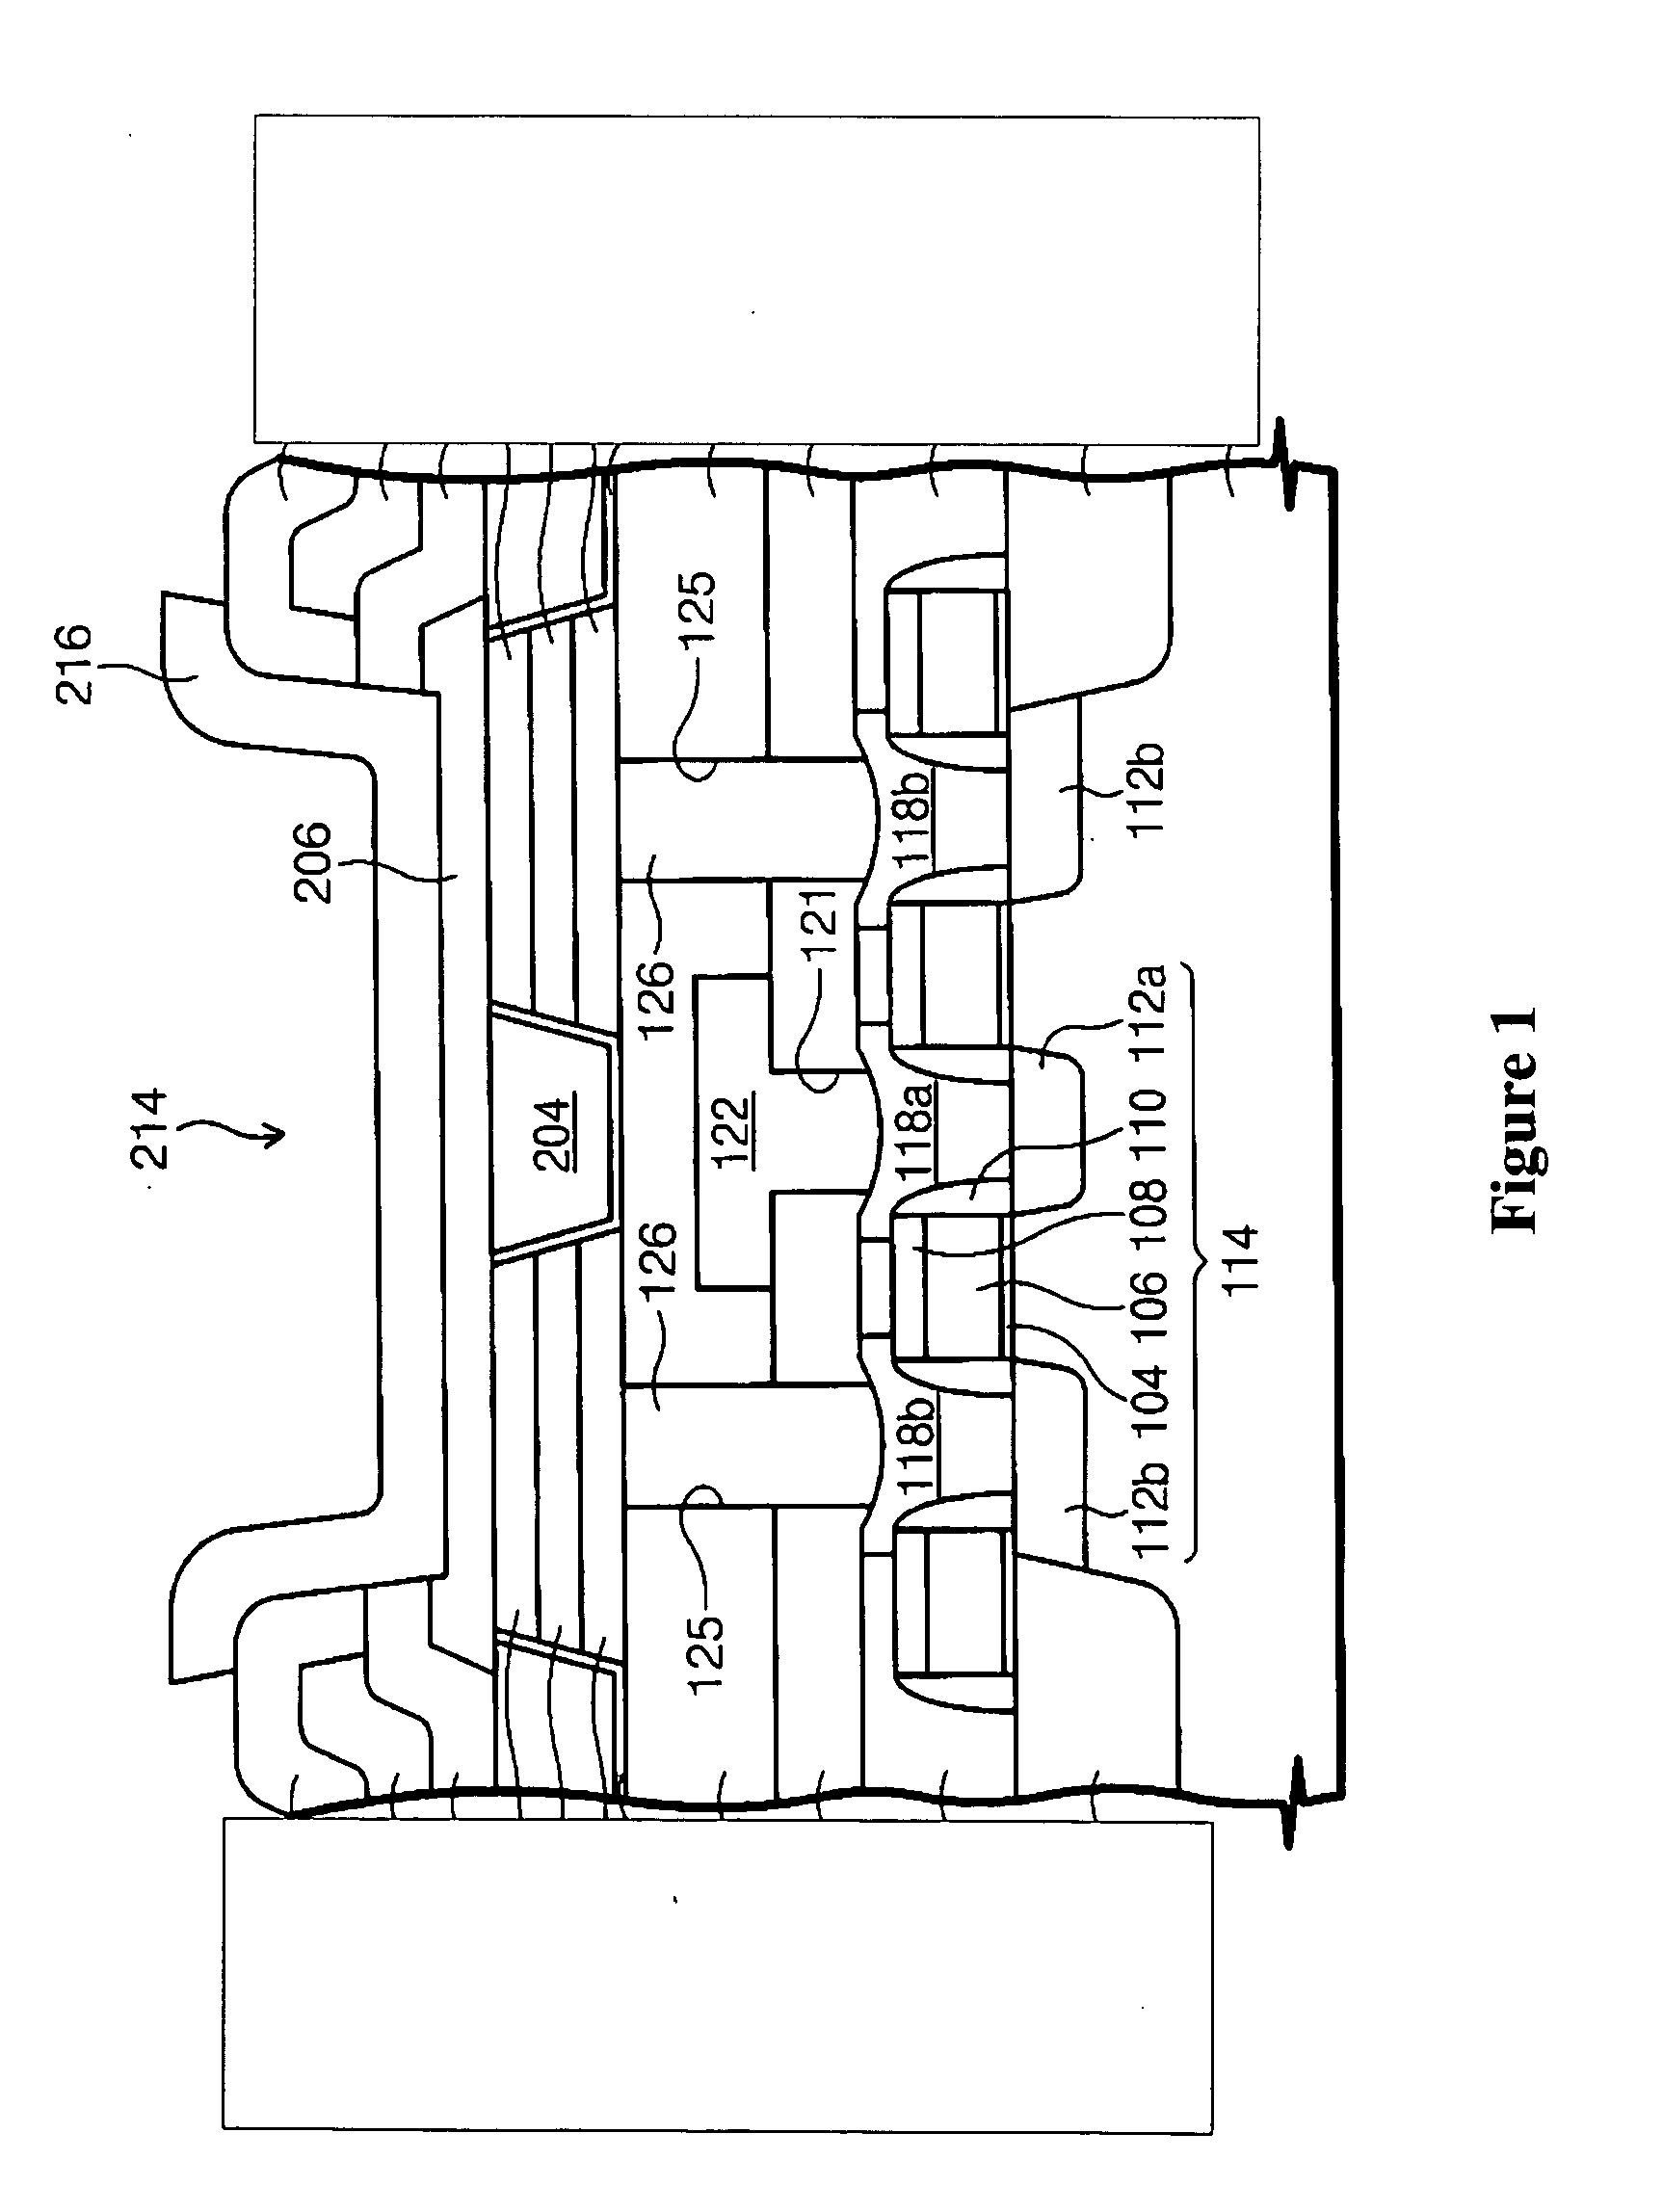 Method and apparatus for forming a ferroelectric layer